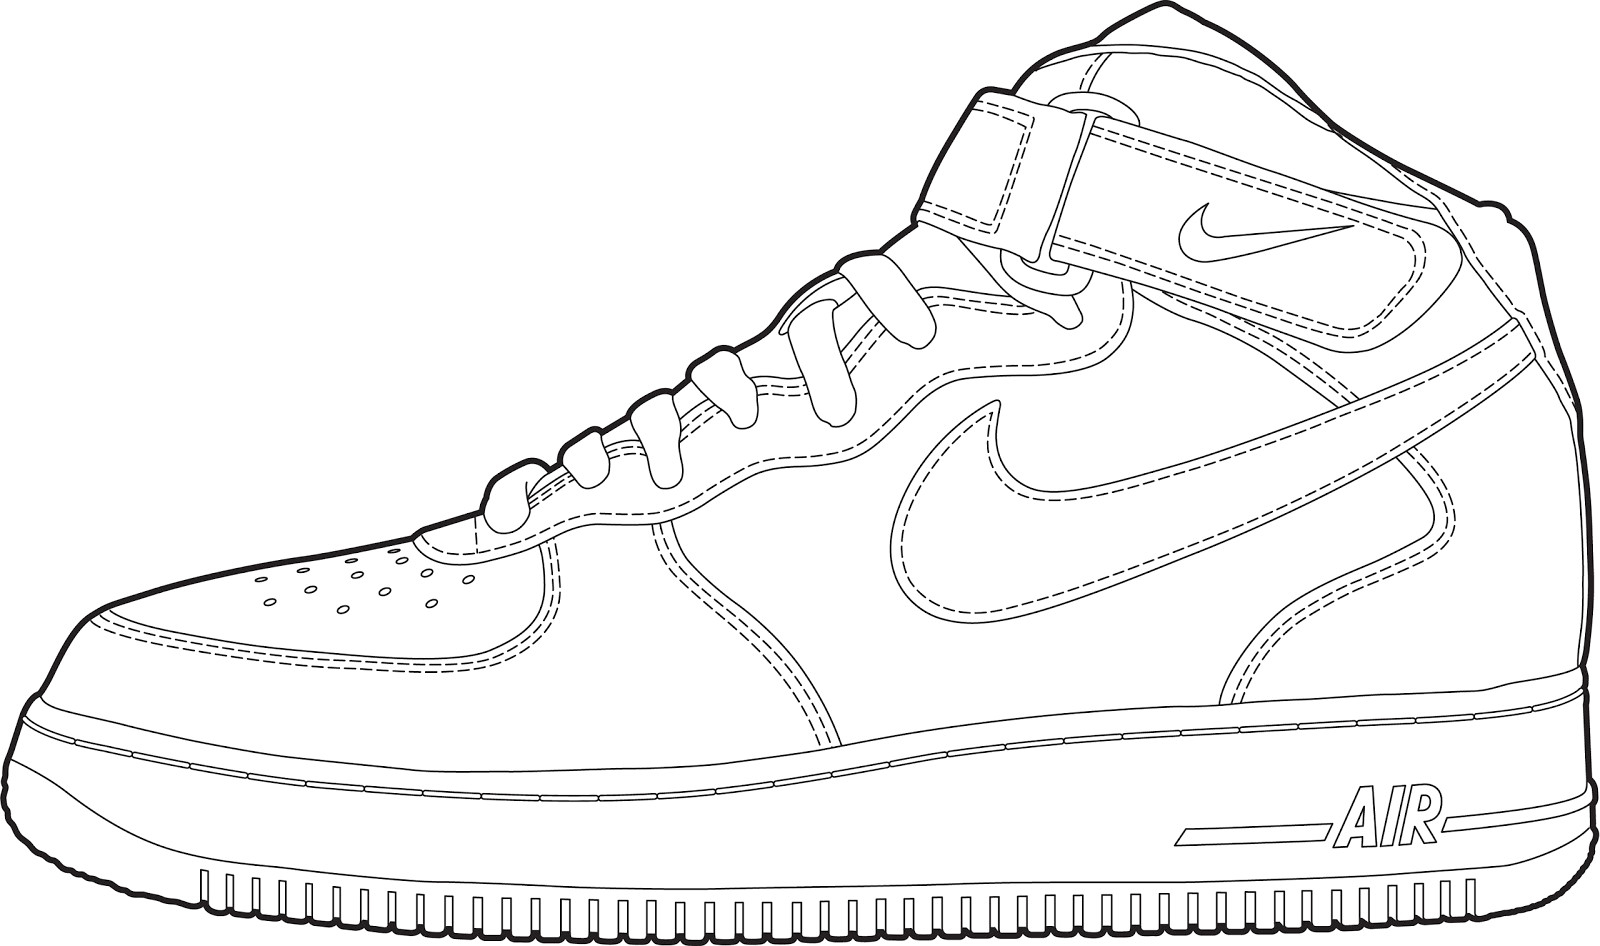 Lebron Shoes Coloring Pages Charming Ideas Printable Tennis Shoe Coloring Pages Popular Shoes